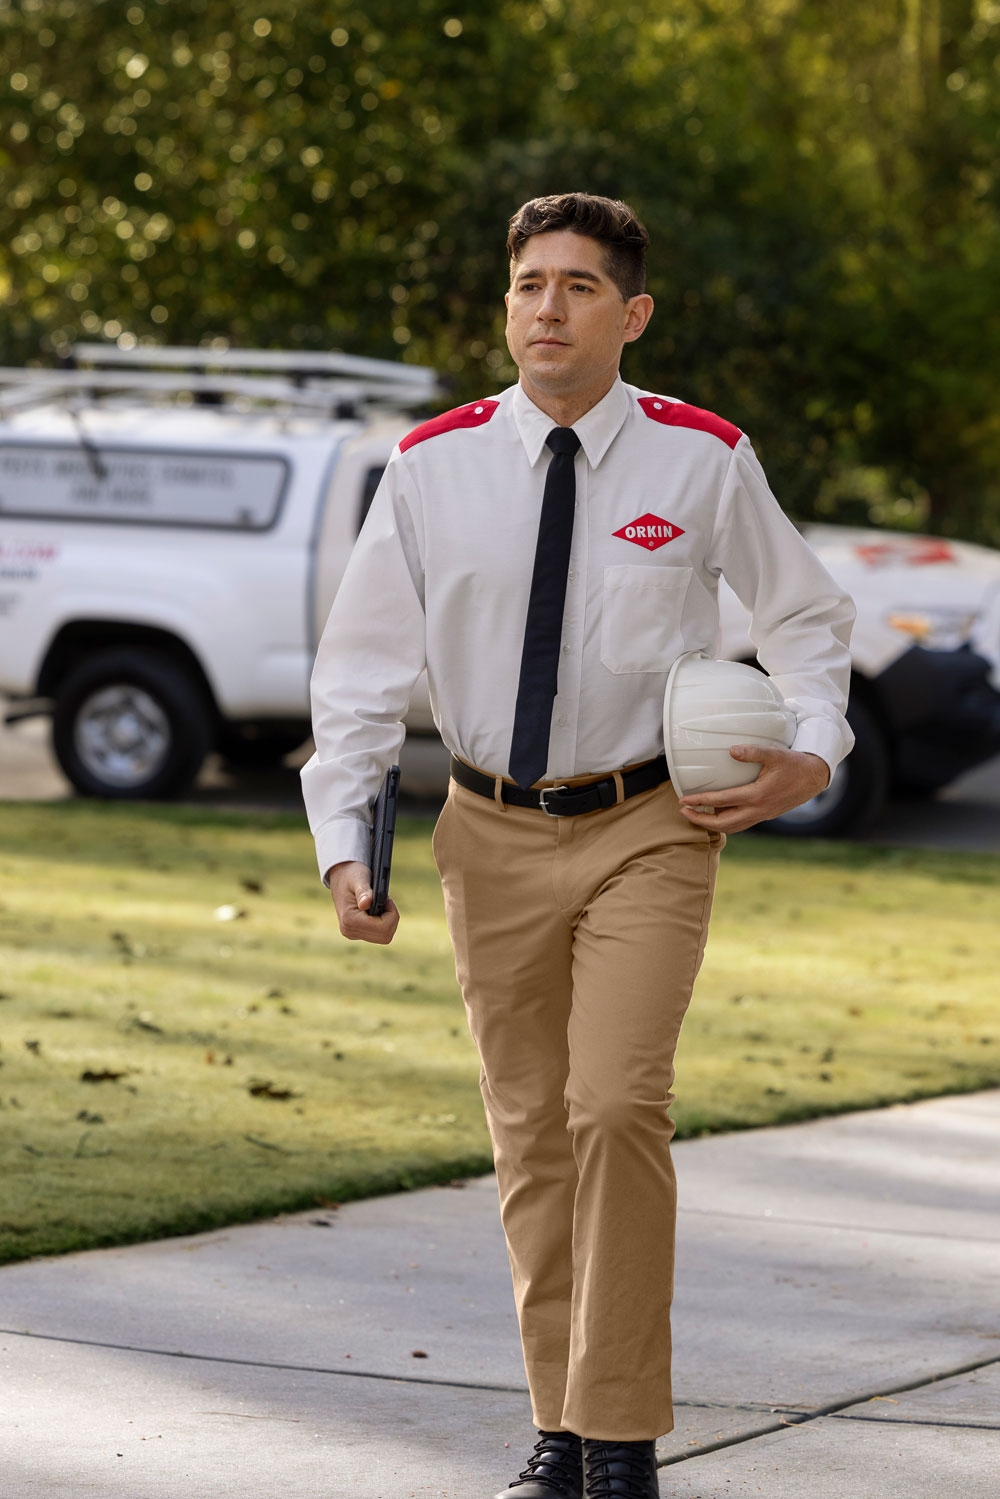 An Orkin Pro leaving his Orkin truck and walking up a customer's driveway